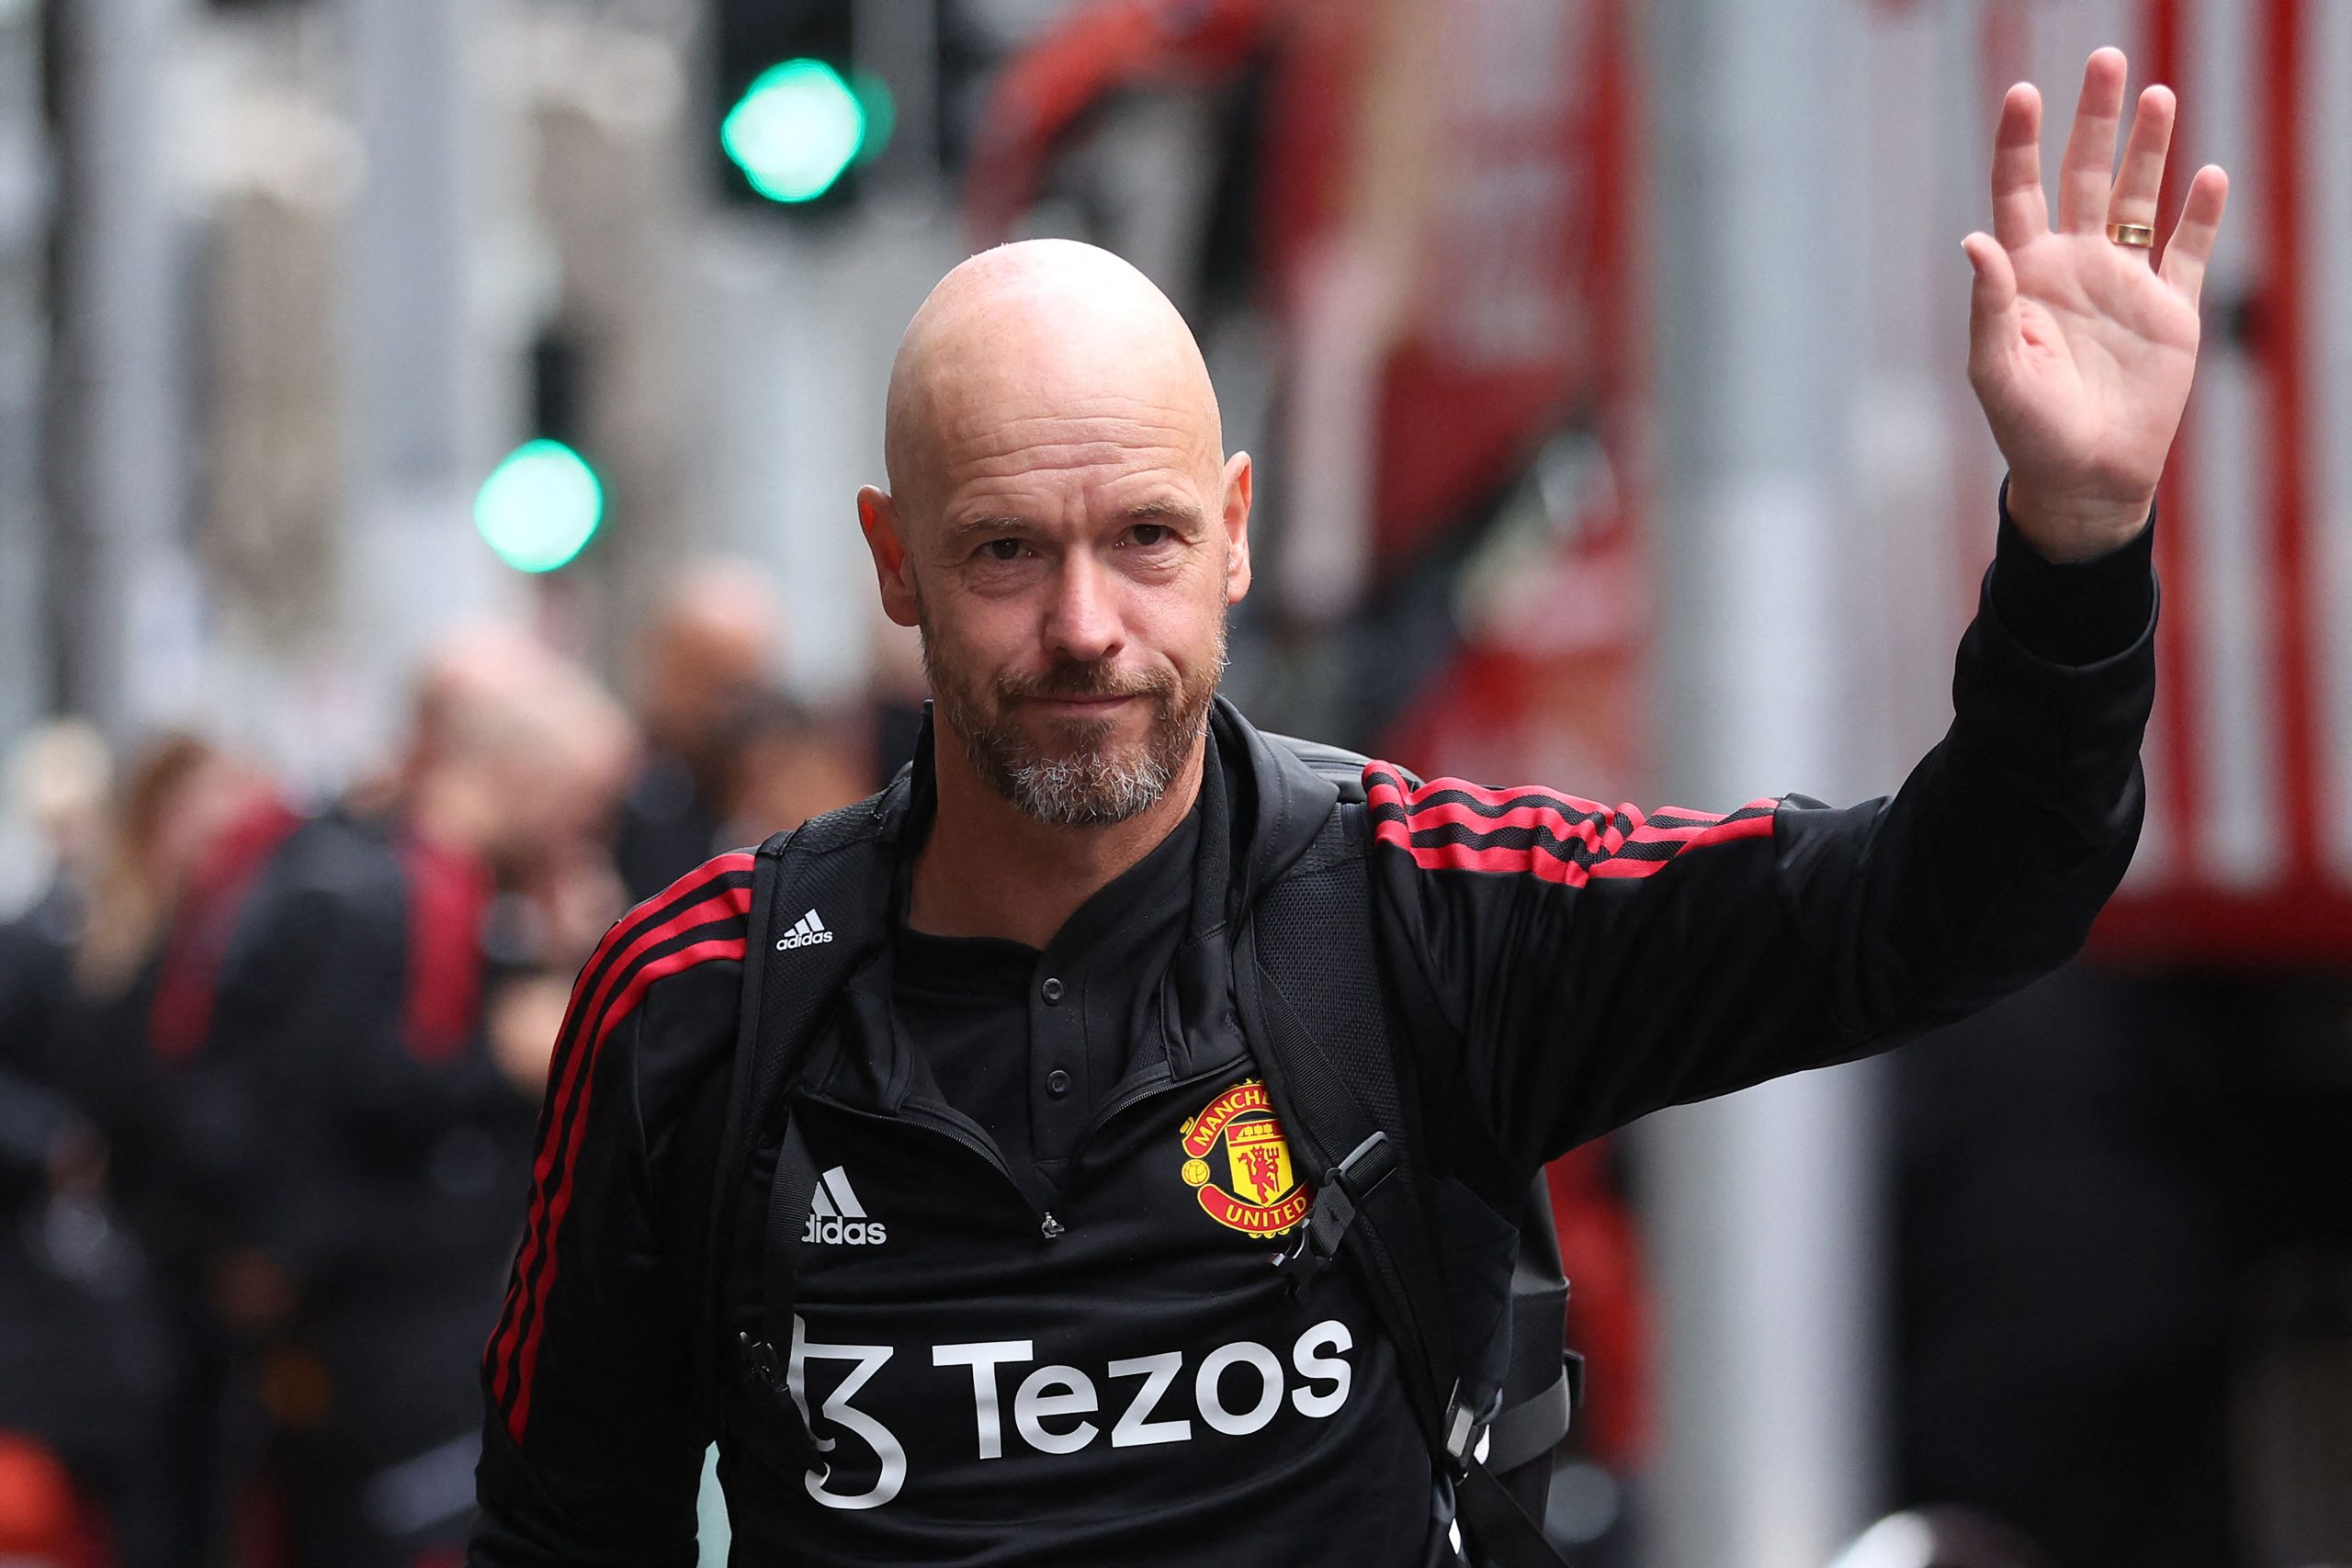 Erik ten Hag is optimistic about Manchester United strengthening the squad before the end of the transfer window.